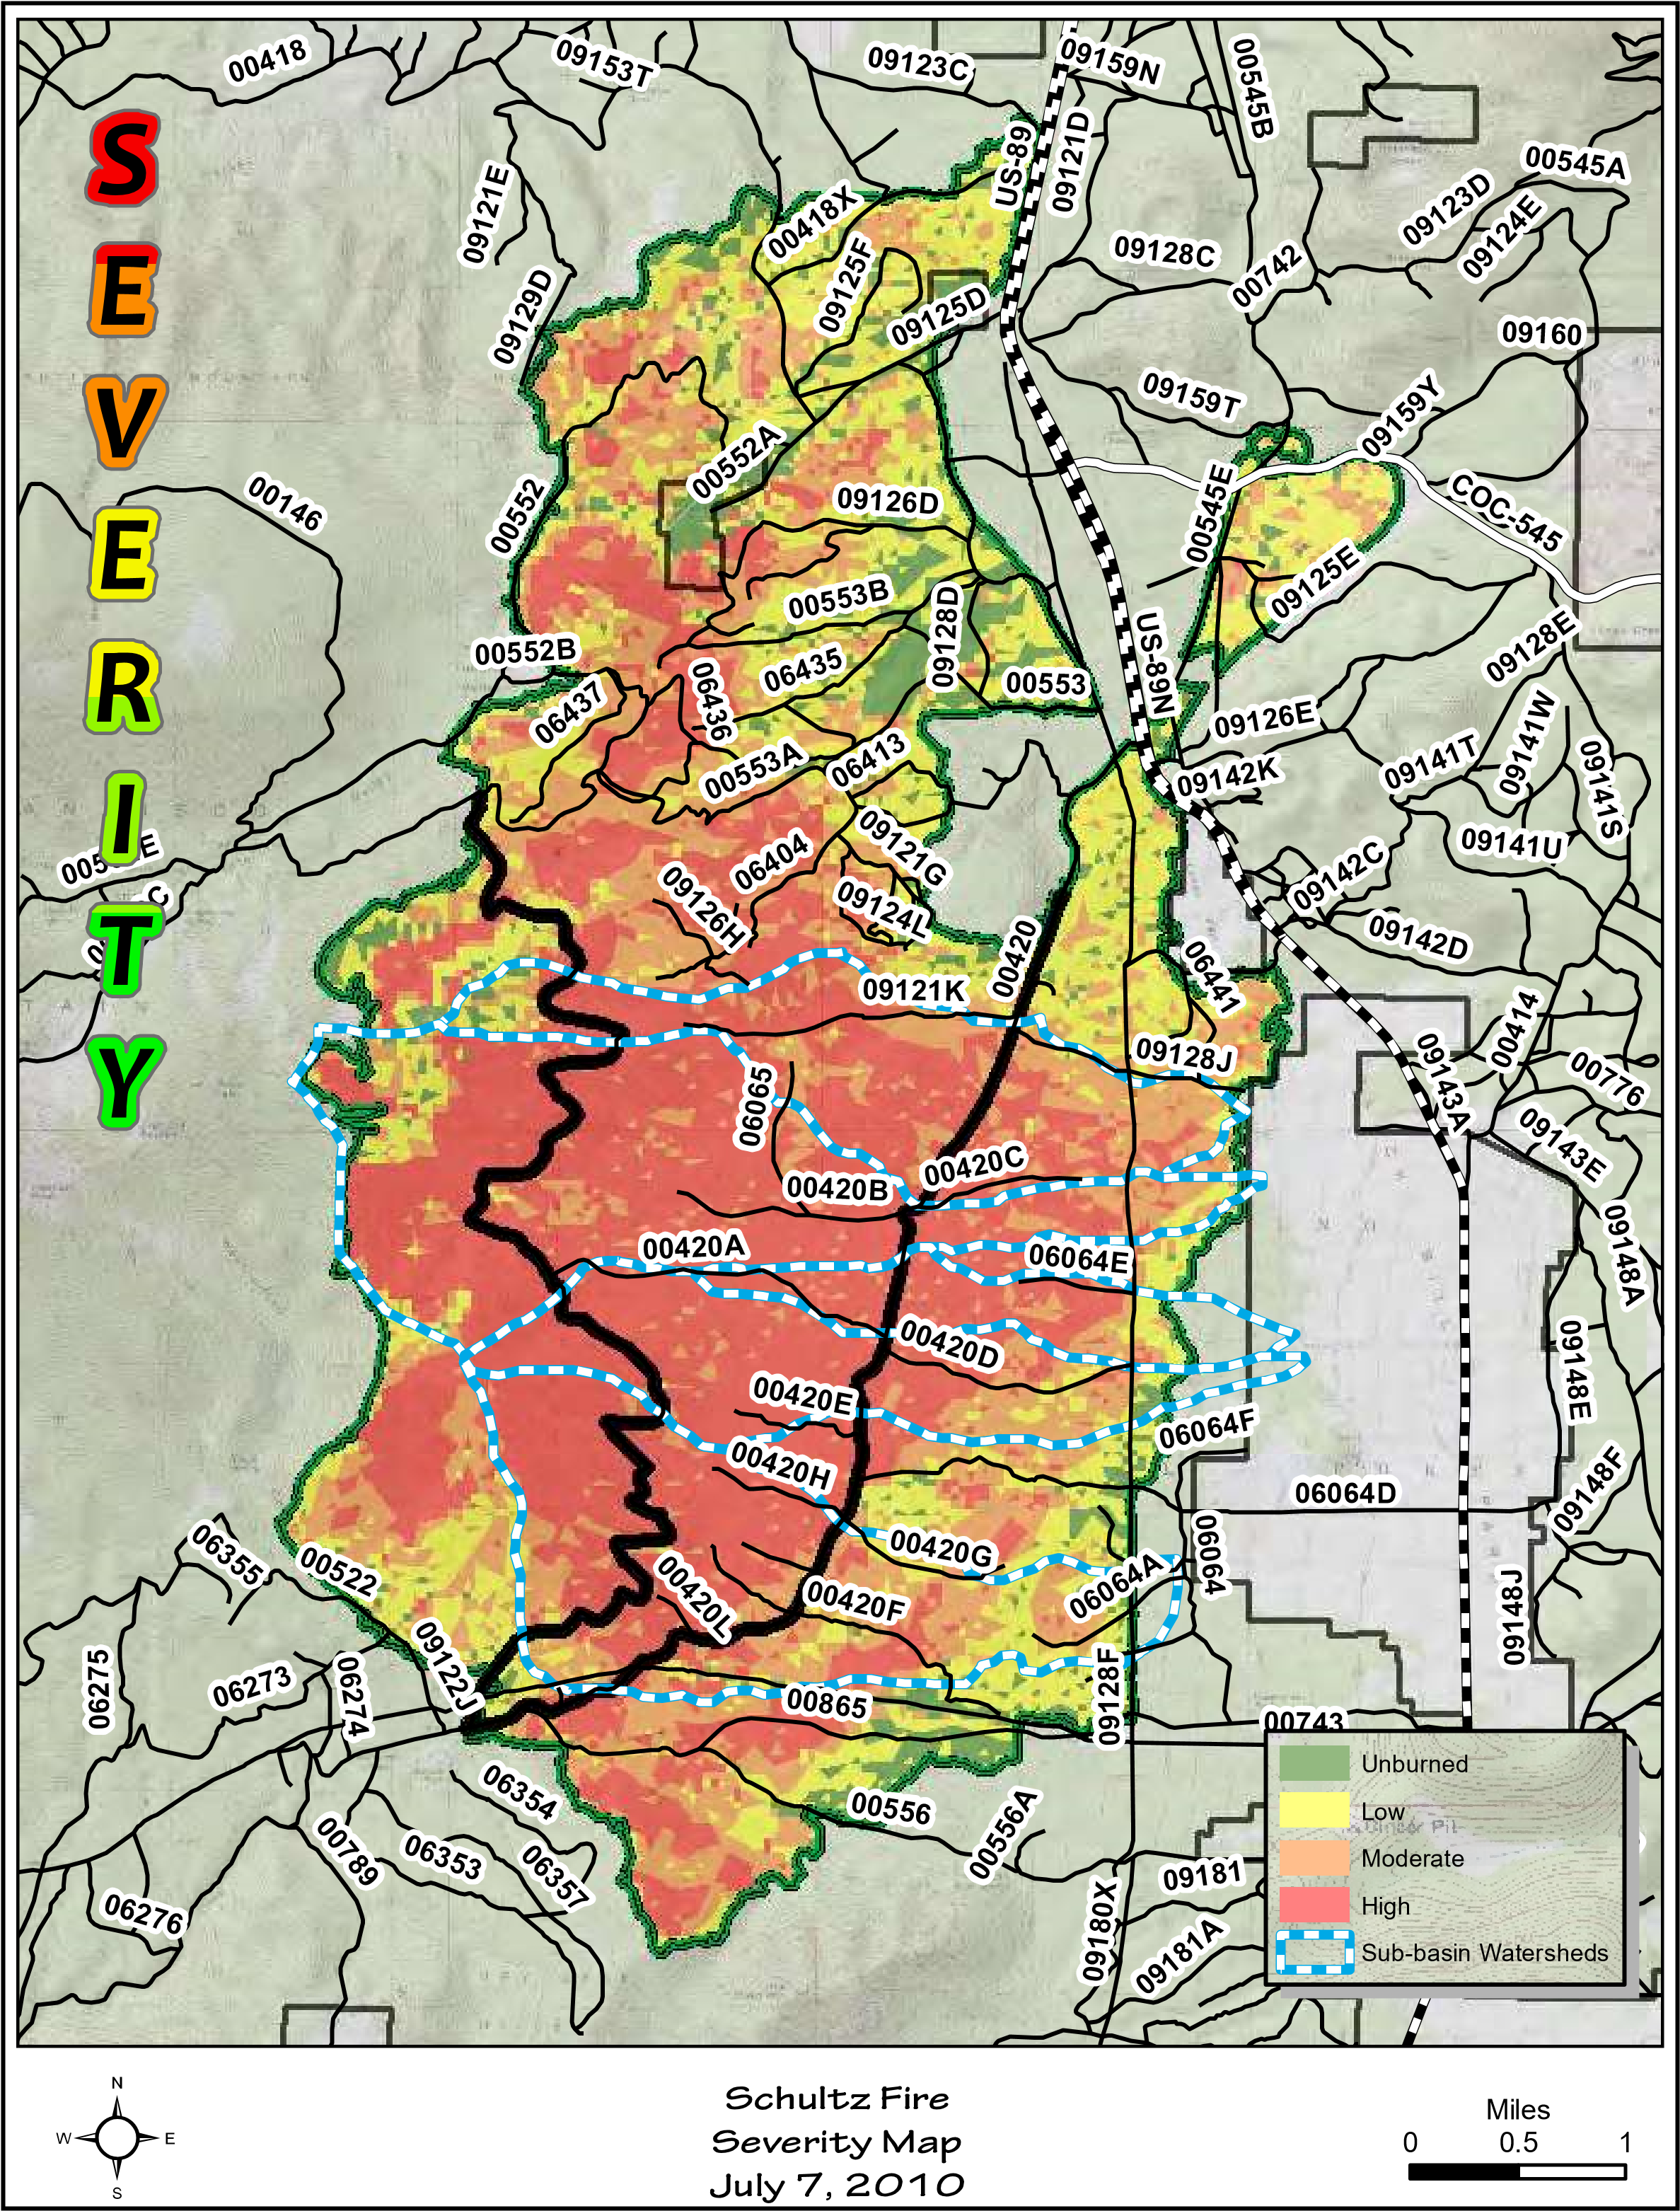 Map of the Schultz Fire burn severity throughout the burn scar area. Figure credit: USDA Forest Service, Schultz Fire BAER Report